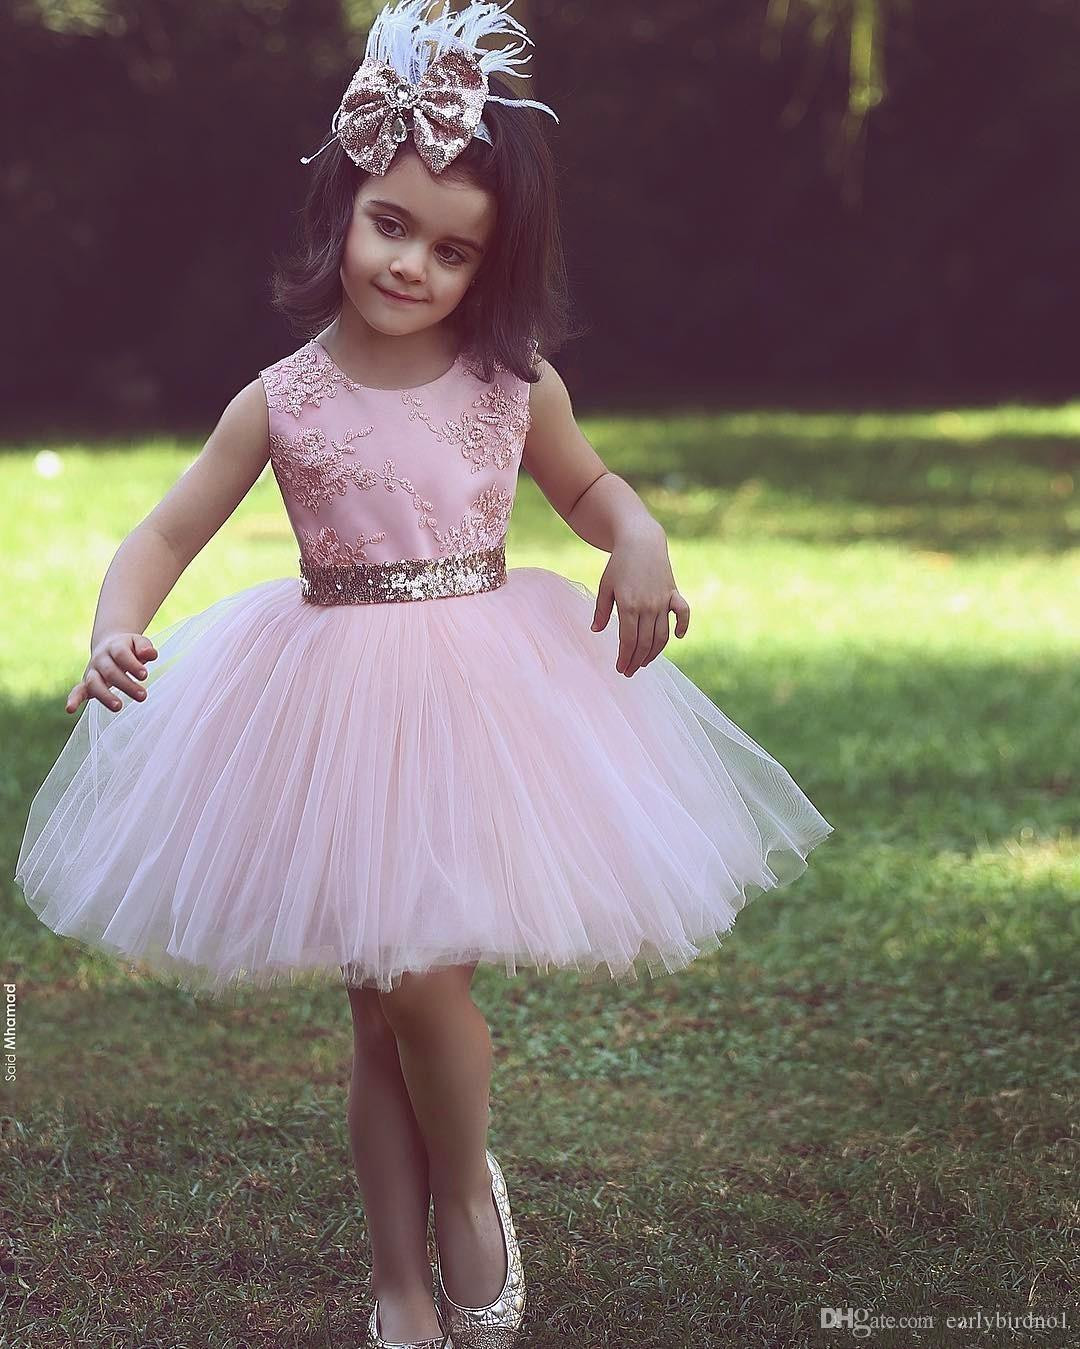 Macy'S Baby Girl Party Dresses
 2018 Cute Pink Short Flower Girl Dresses For Country